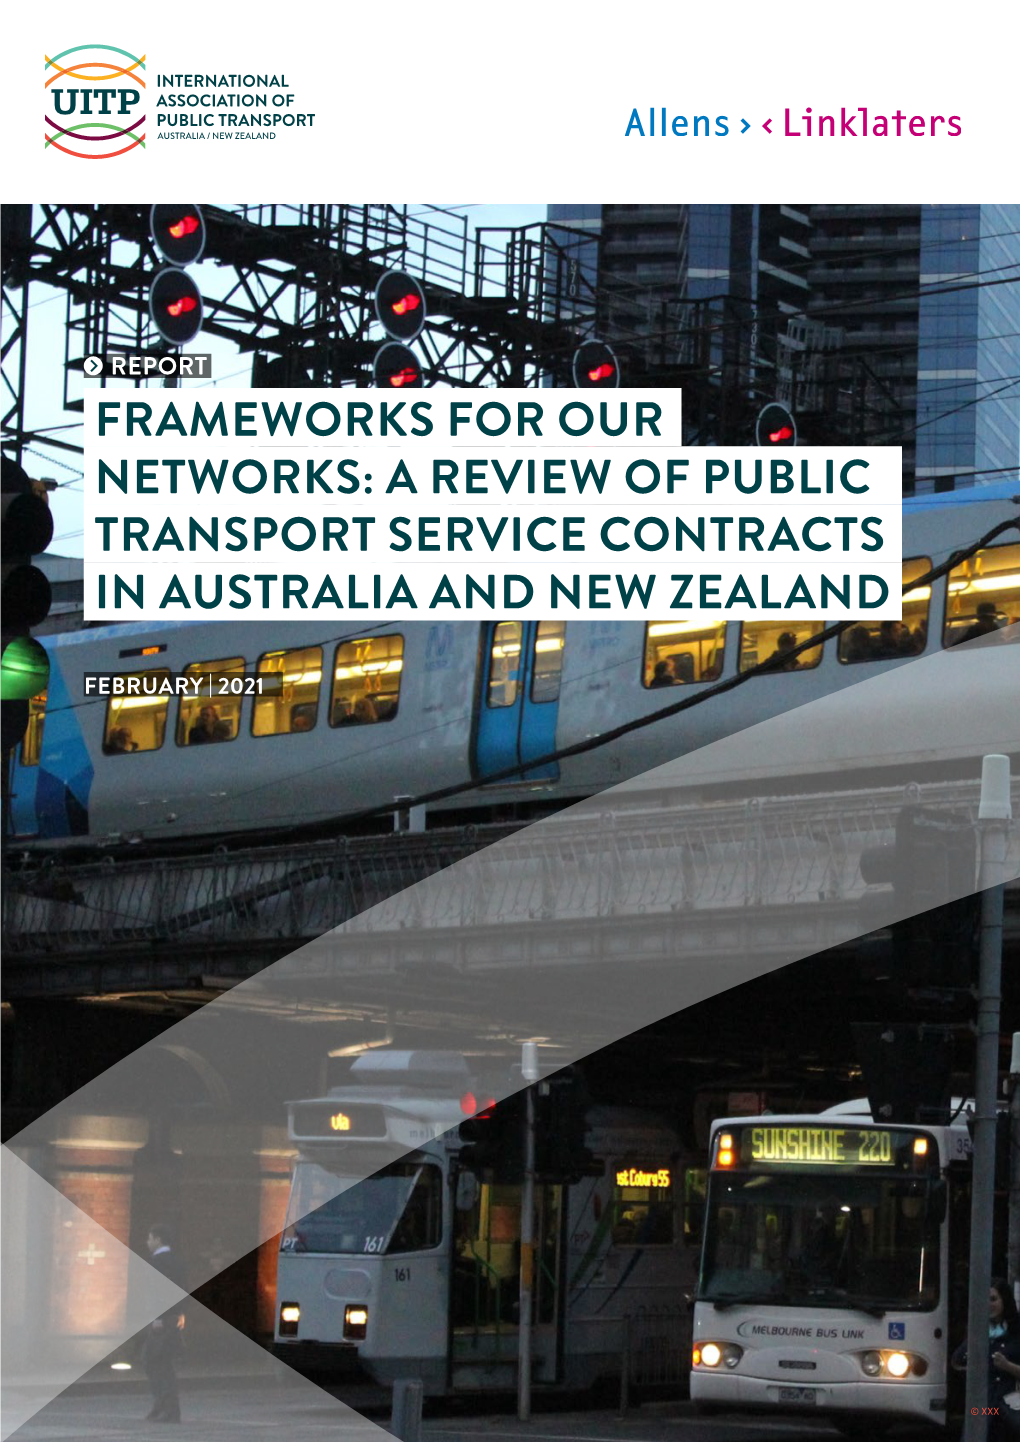 A Review of Public Transport Service Contracts in Australia and New Zealand